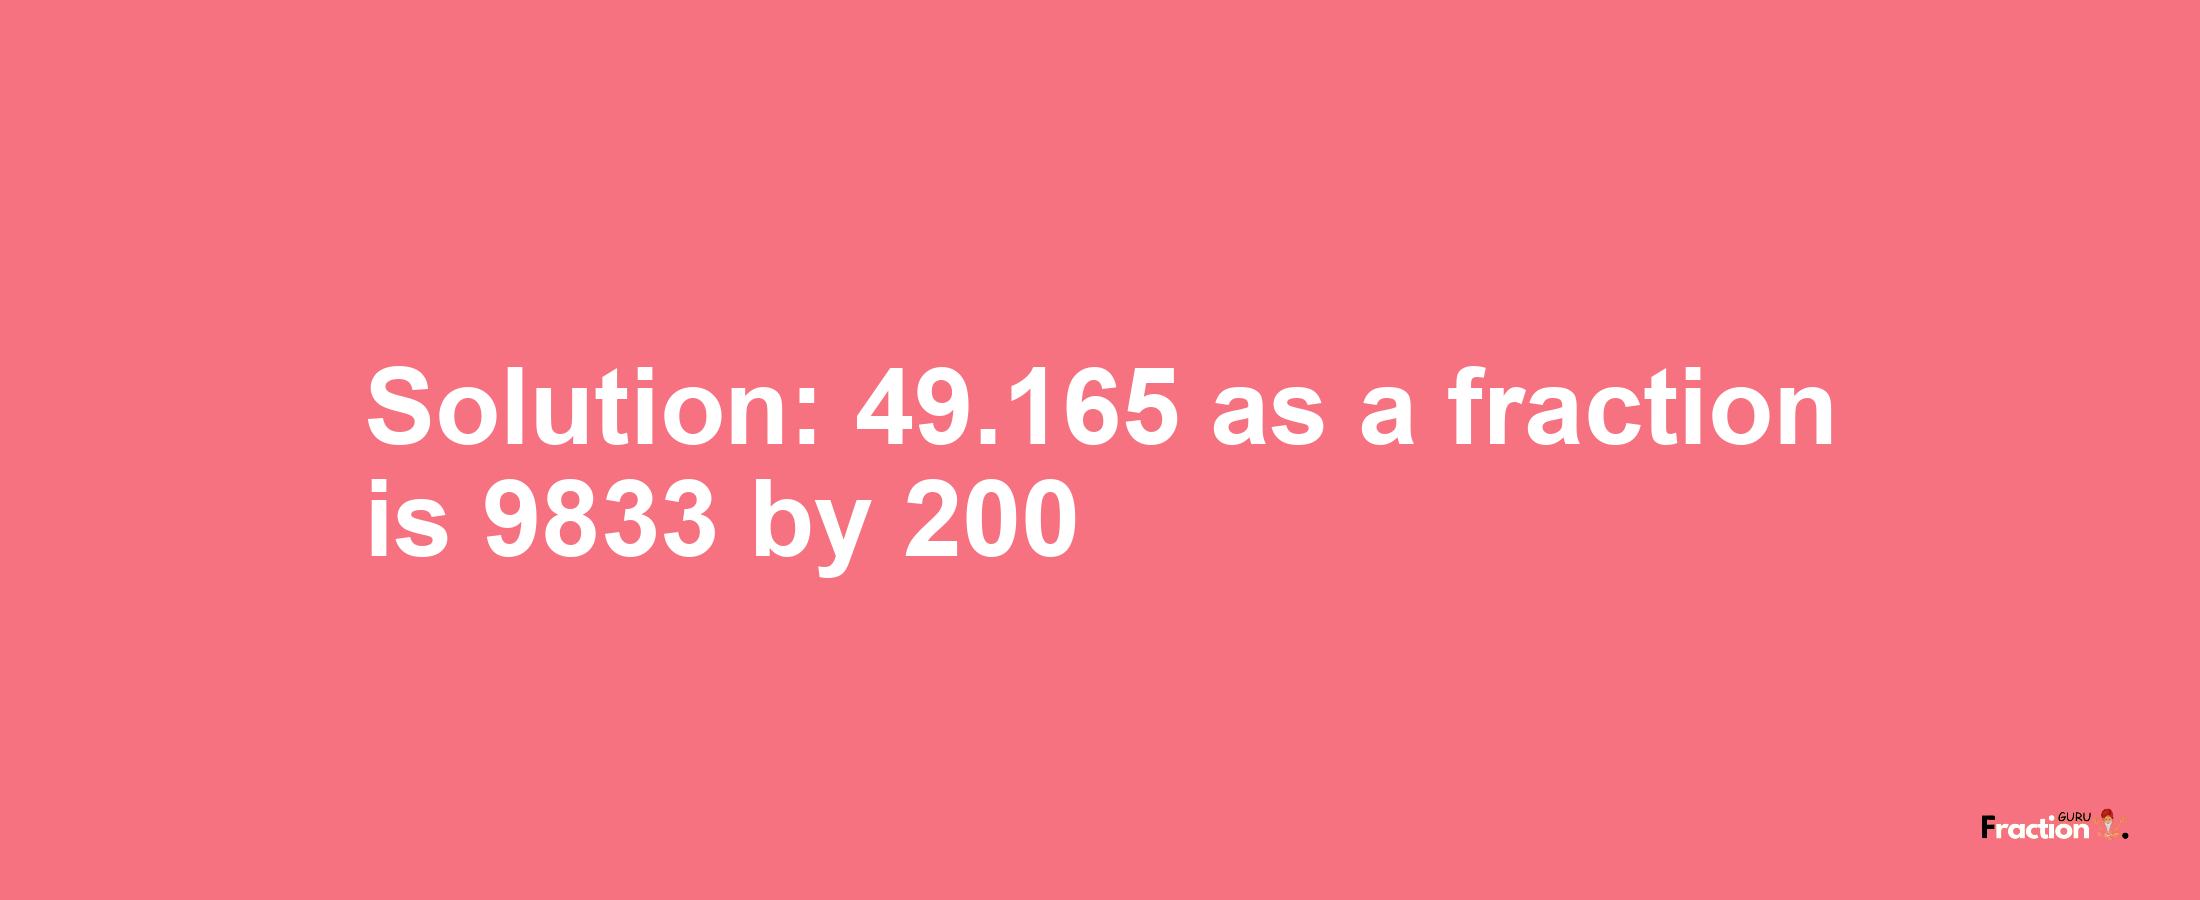 Solution:49.165 as a fraction is 9833/200